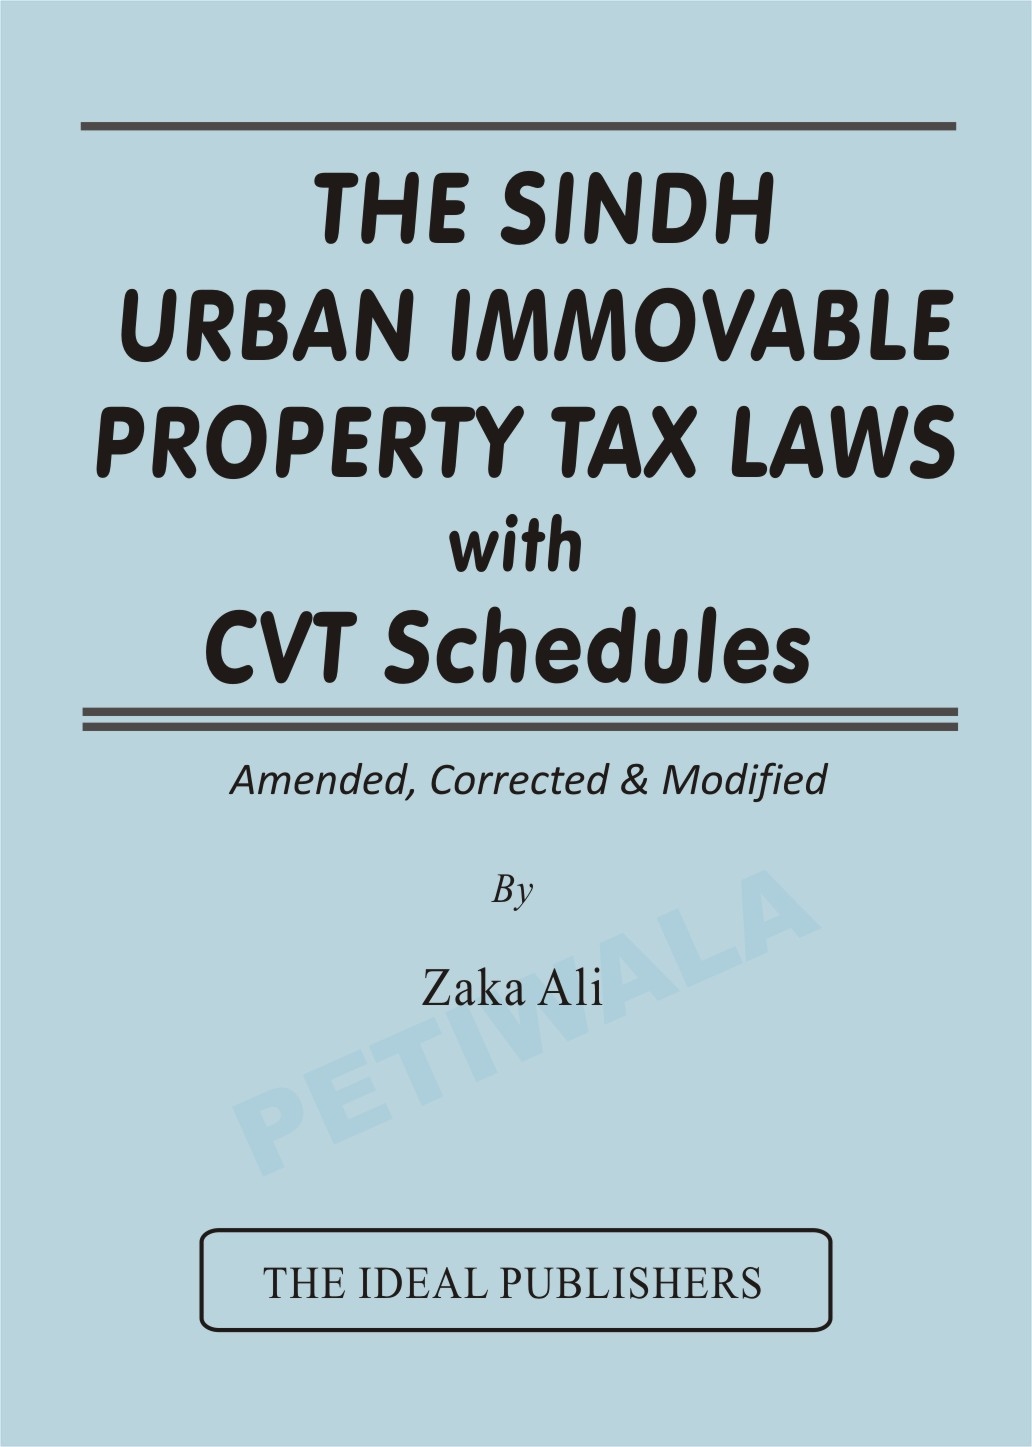 The Sindh Urban Immovable Property Tax Laws with CVT